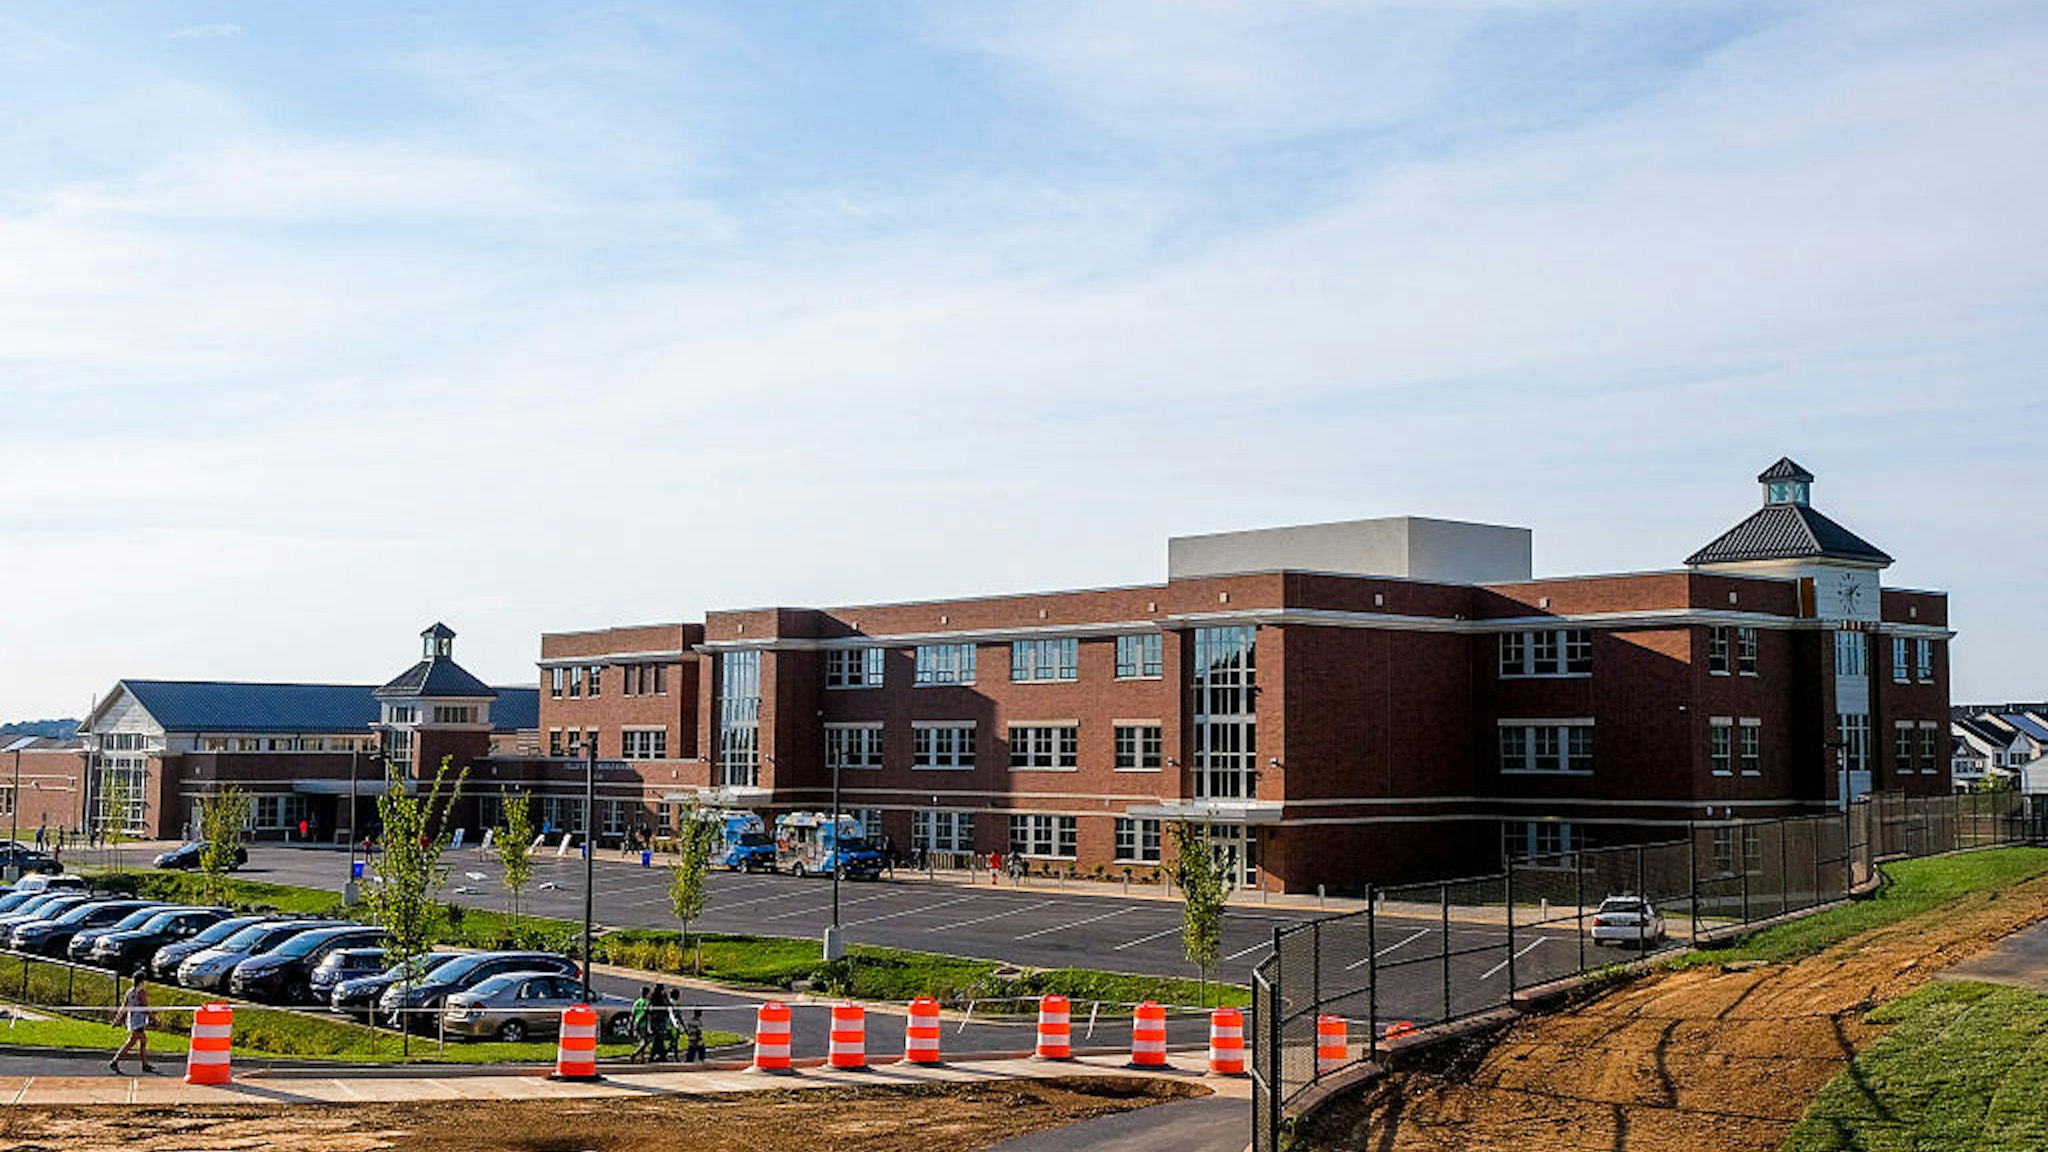 Hallie Wells Middle School is the first new middle school in 11 years in Maryland's Montgomery County, on Wednesday, August 24, 2016, in Clarksburg, MD. The school soon opens as enrollment in Montgomery County, Maryland's largest school system, continues to grow.